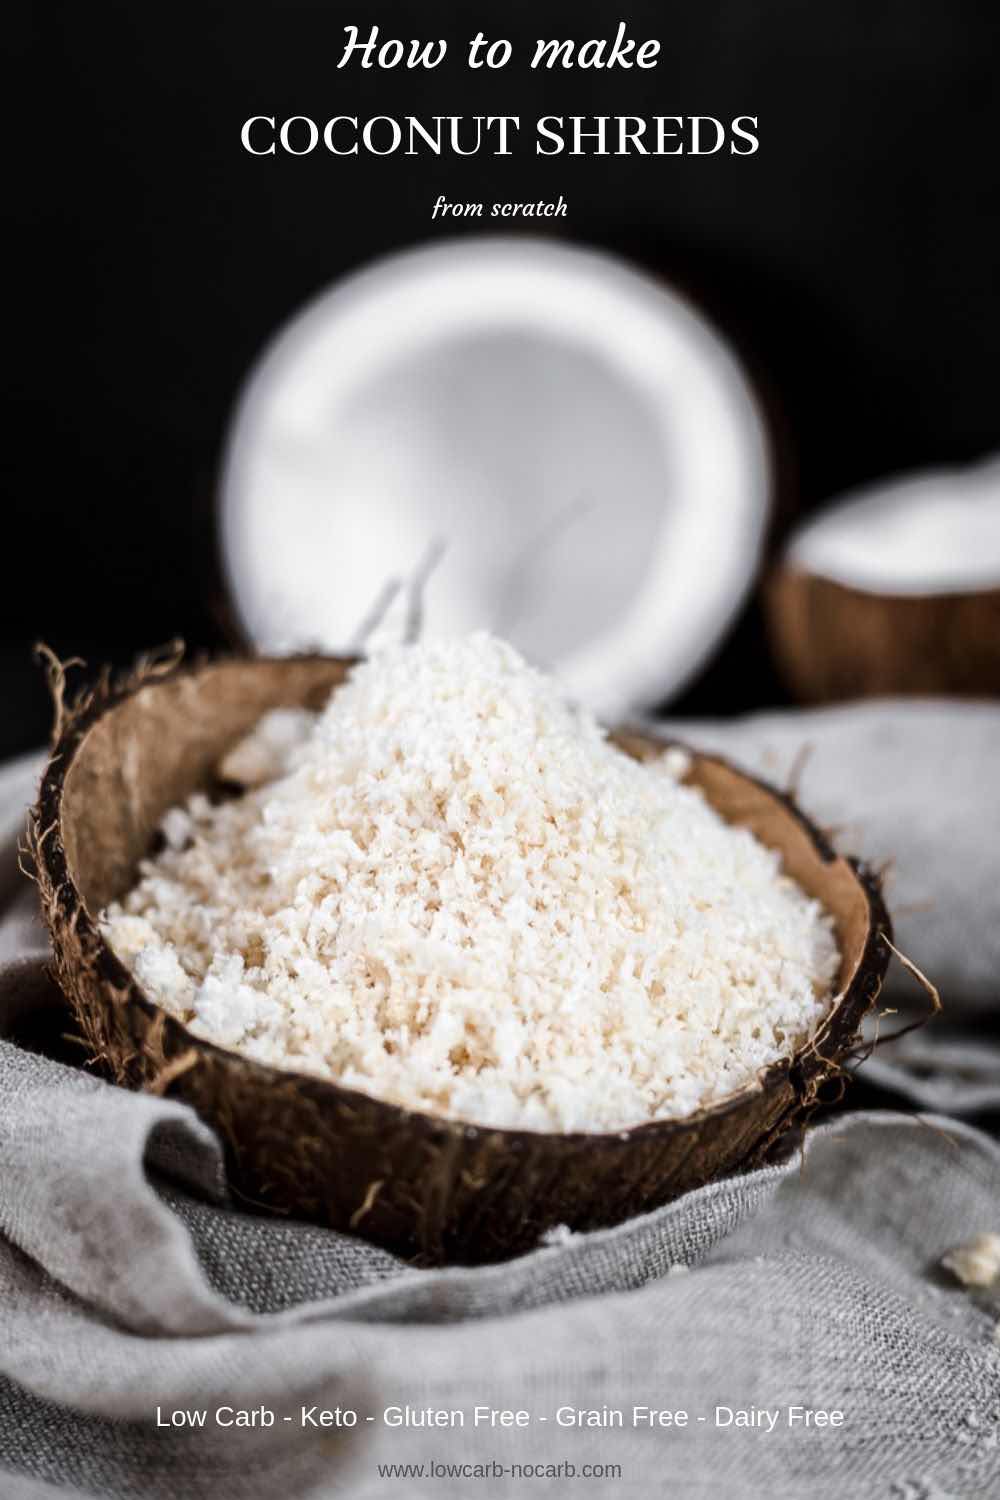 Coconut shreds in a coconut bowl